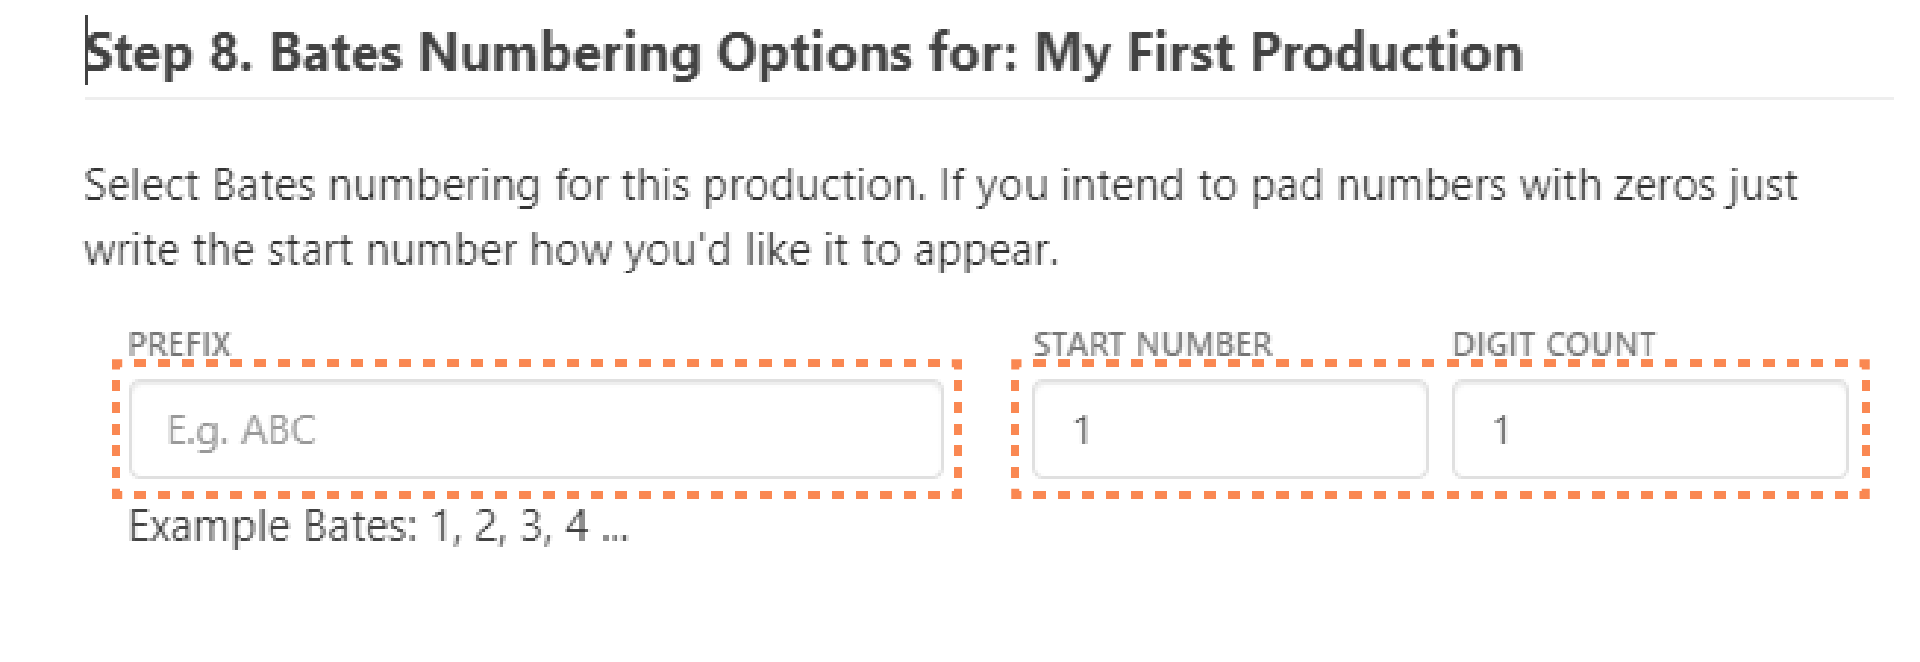 Bates Numbering Option for: My First Production